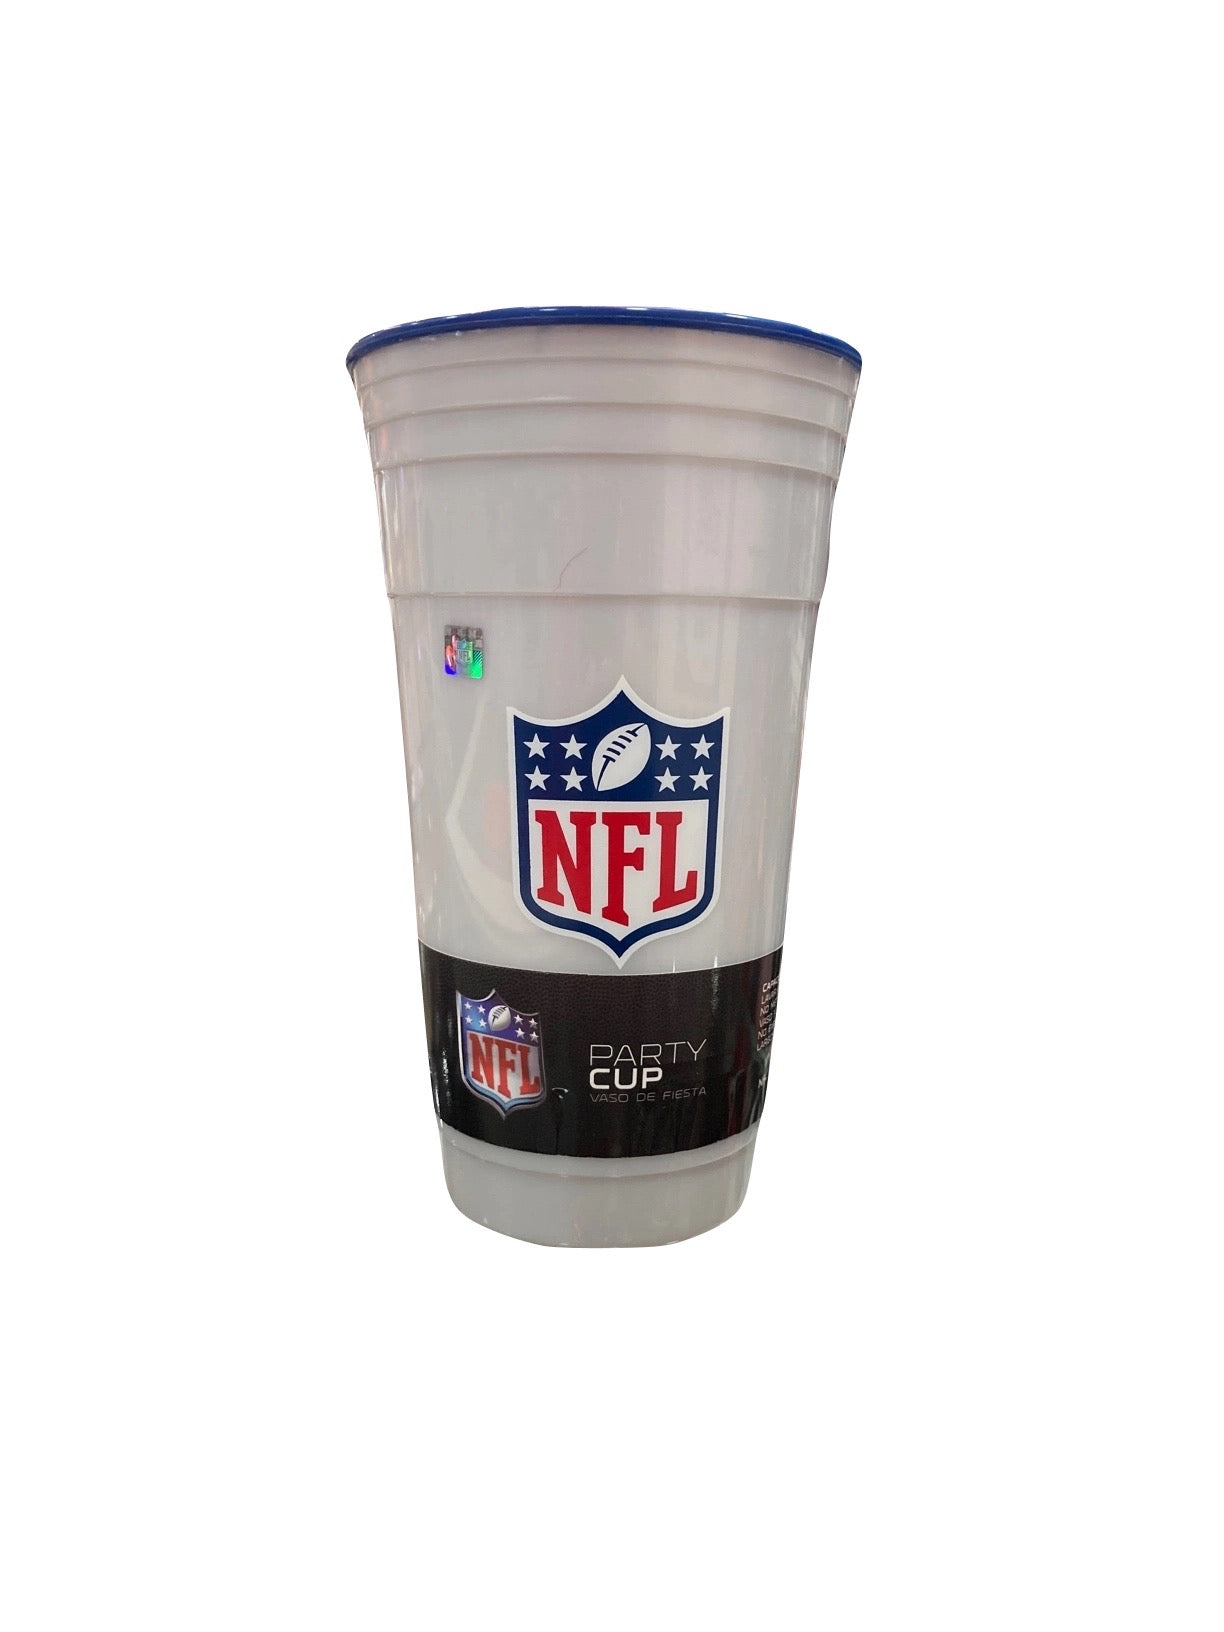 Vaso Nfl 22 Party Cup Nfl